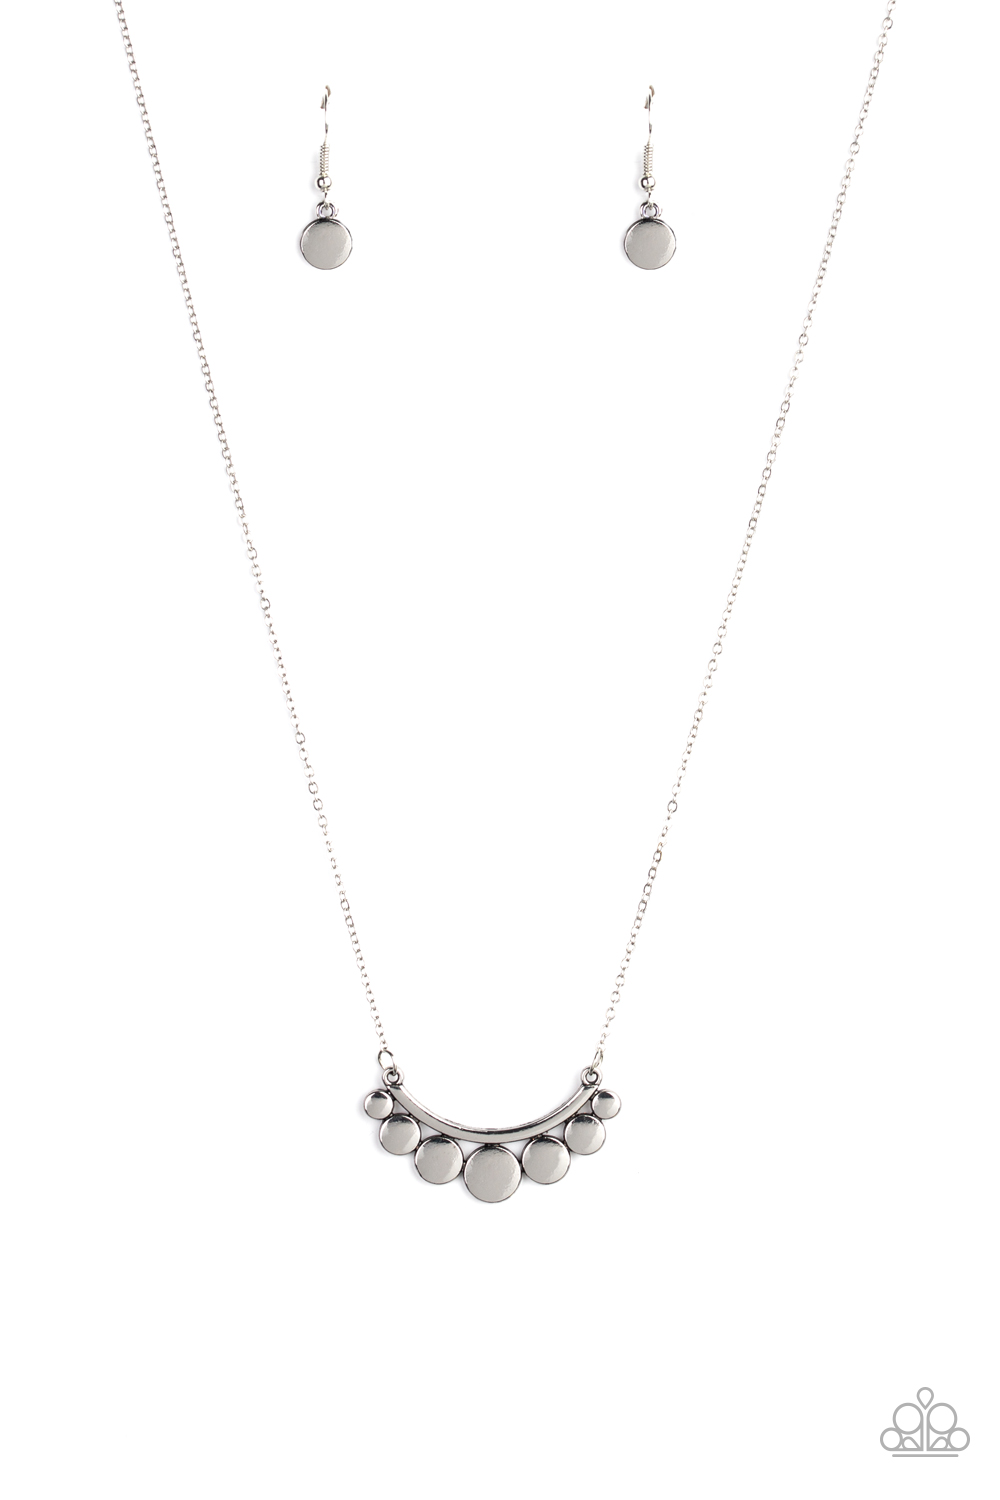 Necklace - Melodic Metallics - Silver